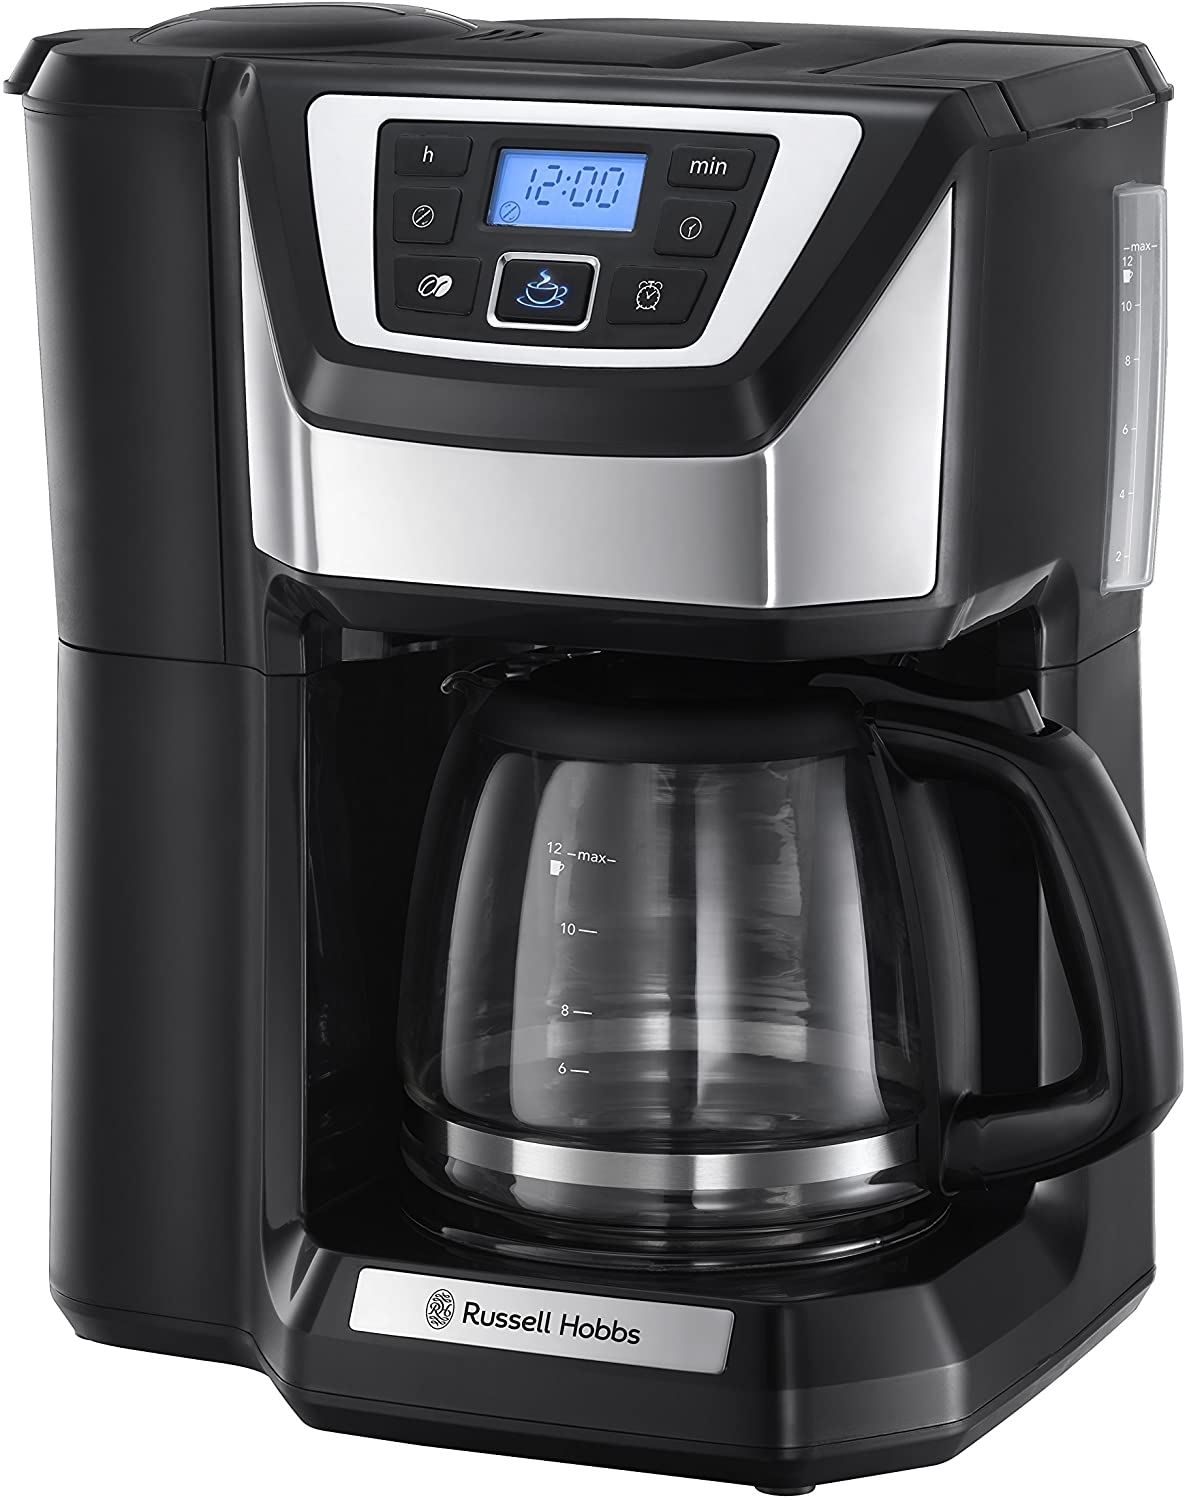 Russell Hobbs 22000 Chester Grind and Brew Coffee Machine Black